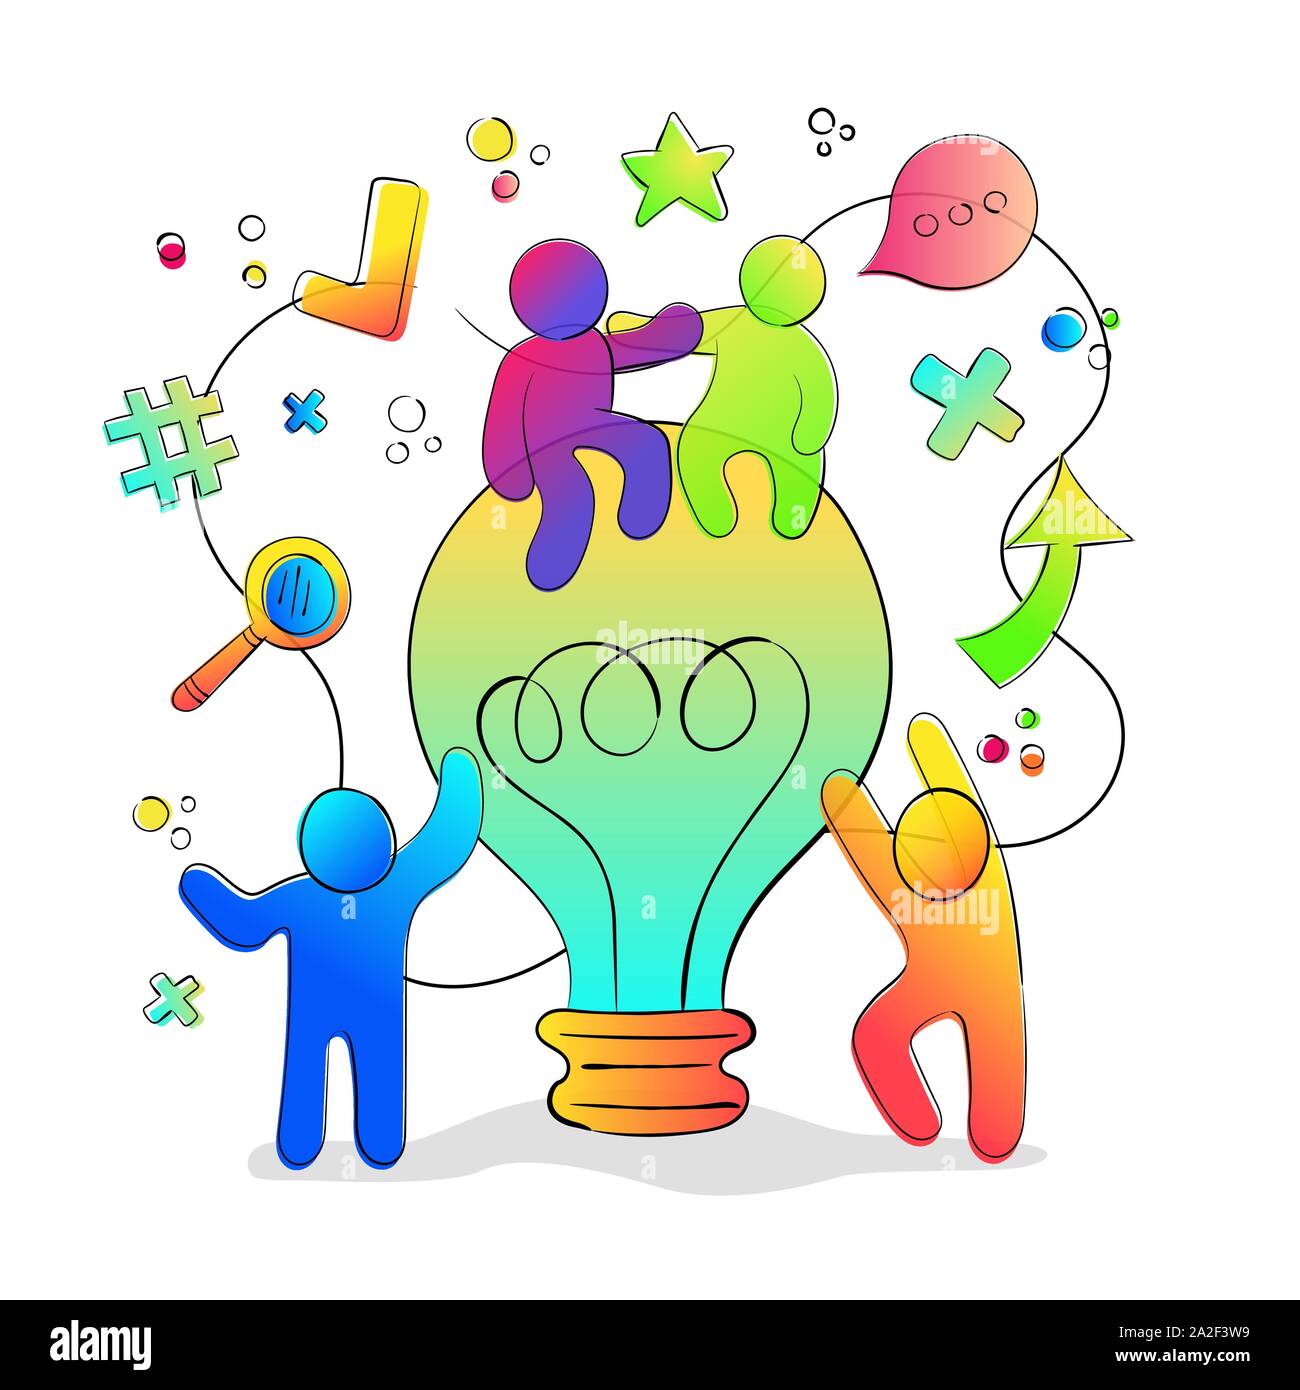 Fun creative idea concept with colorful people working together on big light bulb. Brainstorm session or creativity project illustration. Stock Vector